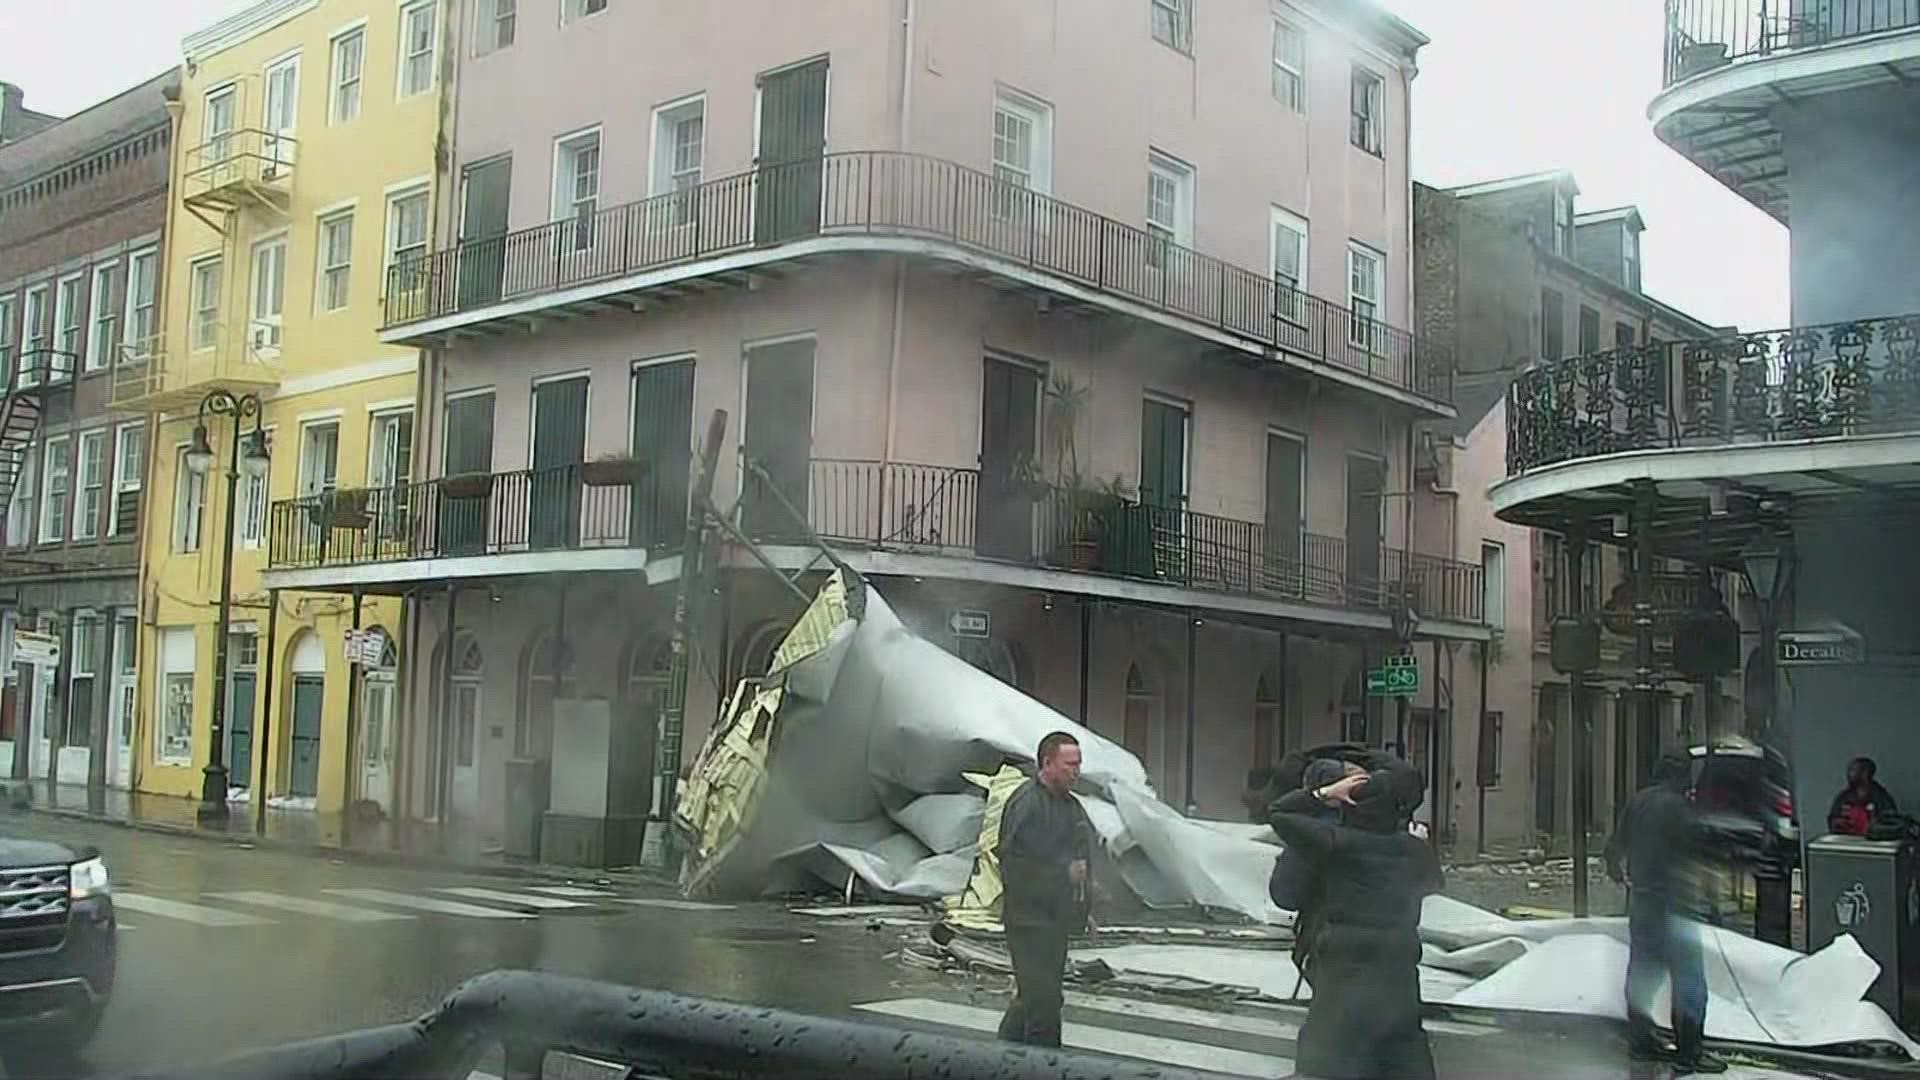 What appears to be a roof has been ripped from a French Quarter building and tossed onto the street as Hurricane Ida approaches New Orleans.